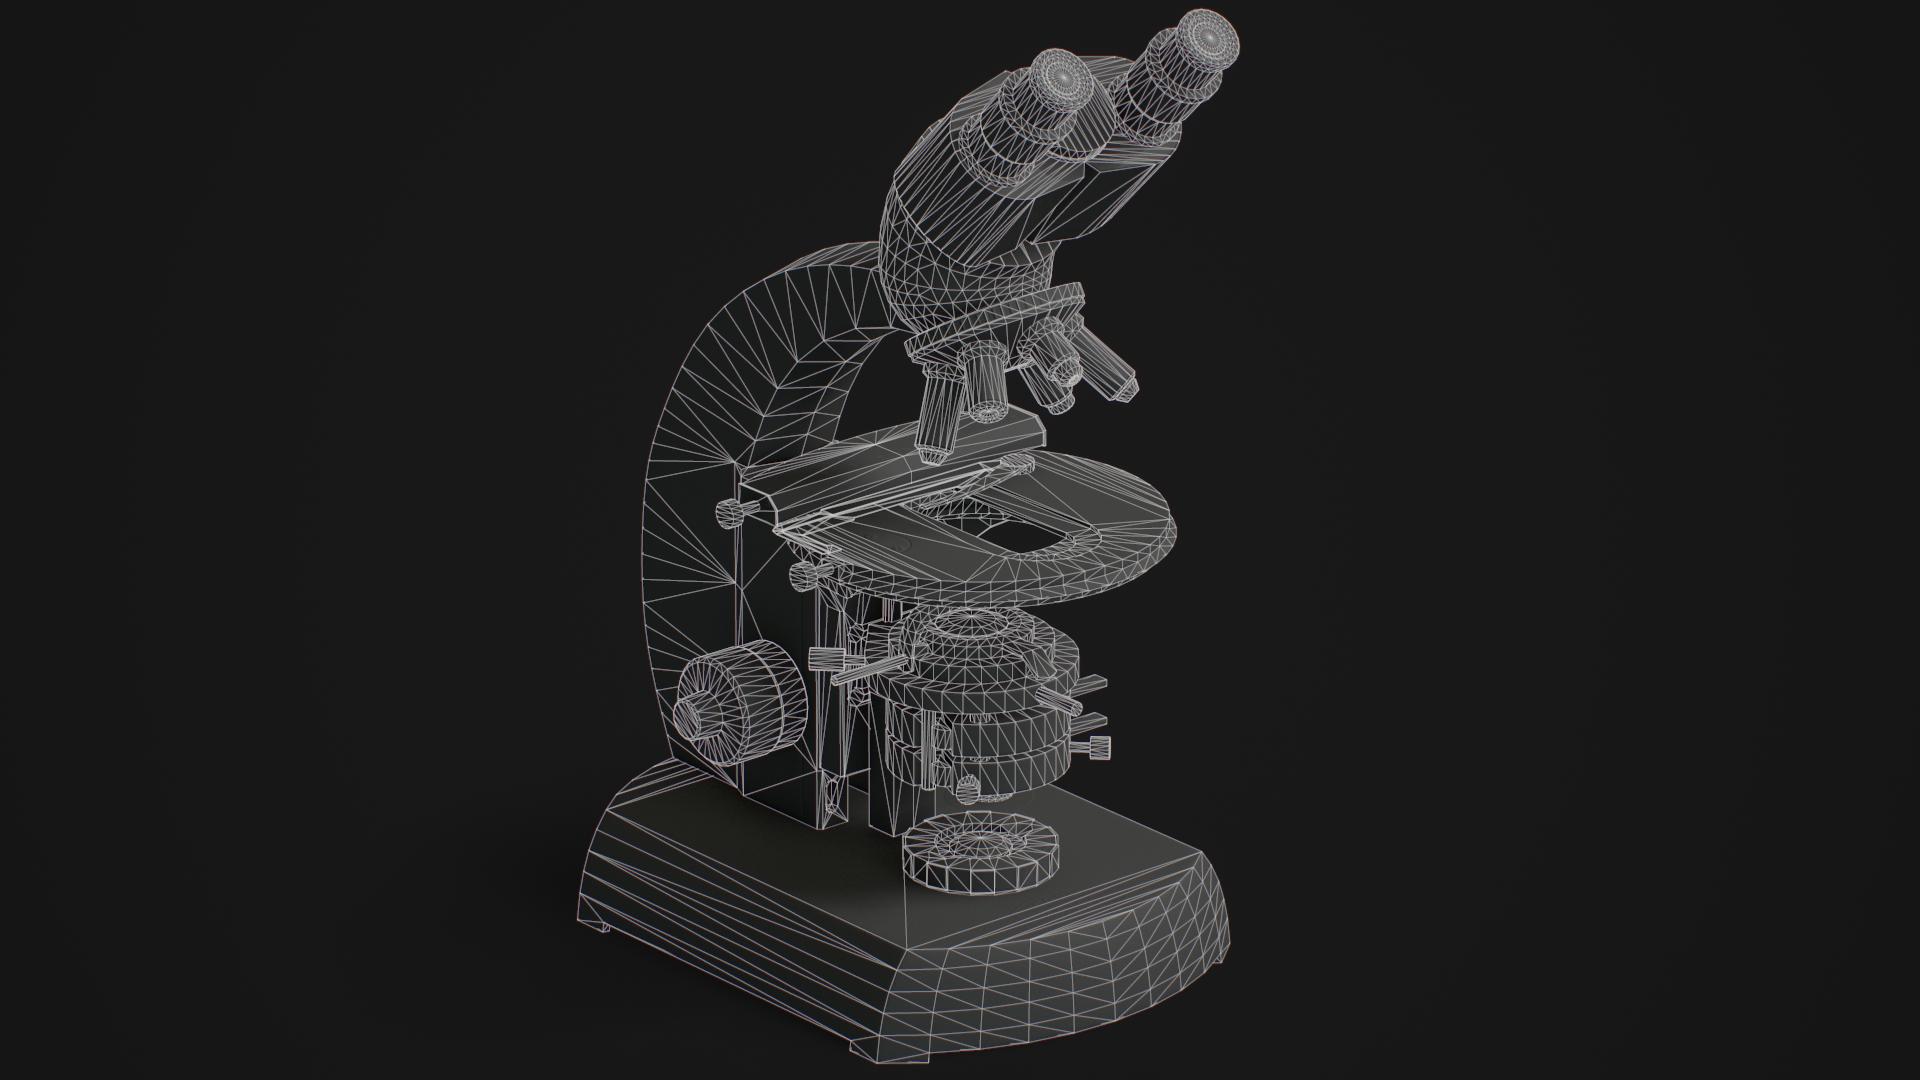 Wireferame render of a zeiss microscope